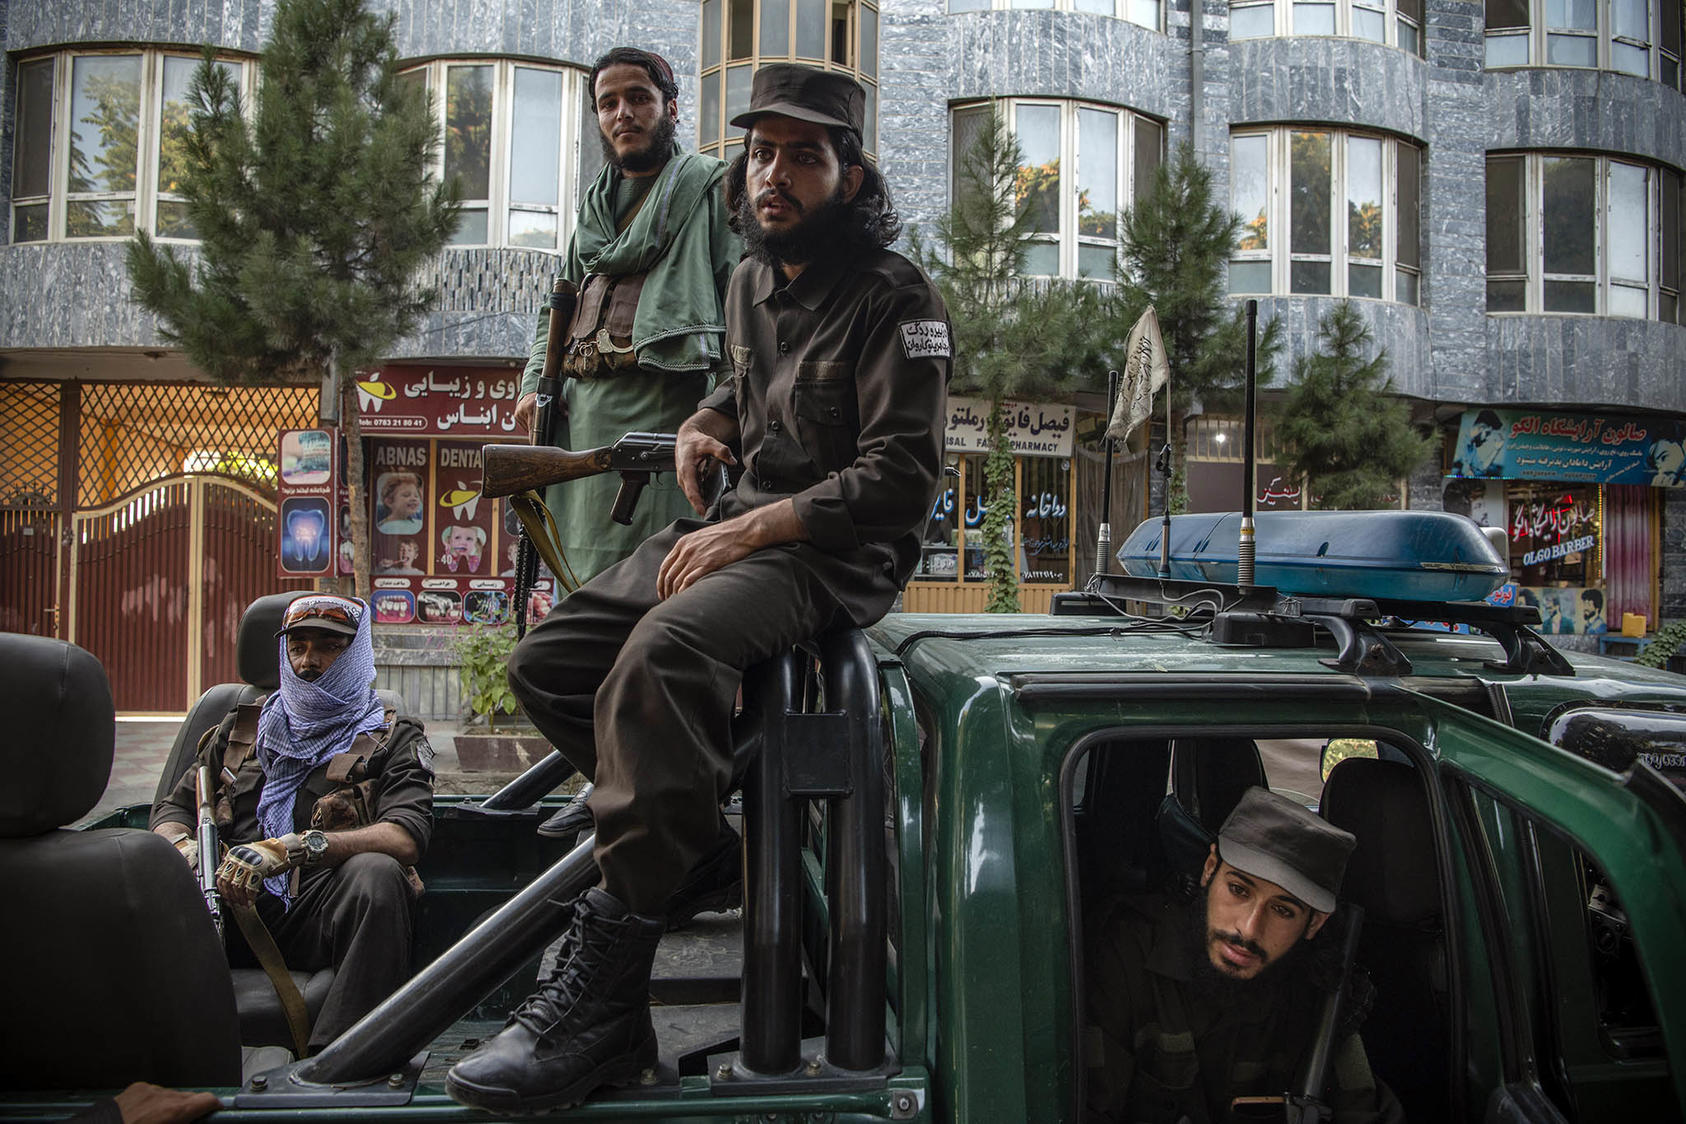 A unit of Taliban fighters, who now wear brown uniforms, in charge of car searches in Kabul, Afghanistan, Aug. 10, 2022. (Kiana Hayeri/The New York Times)